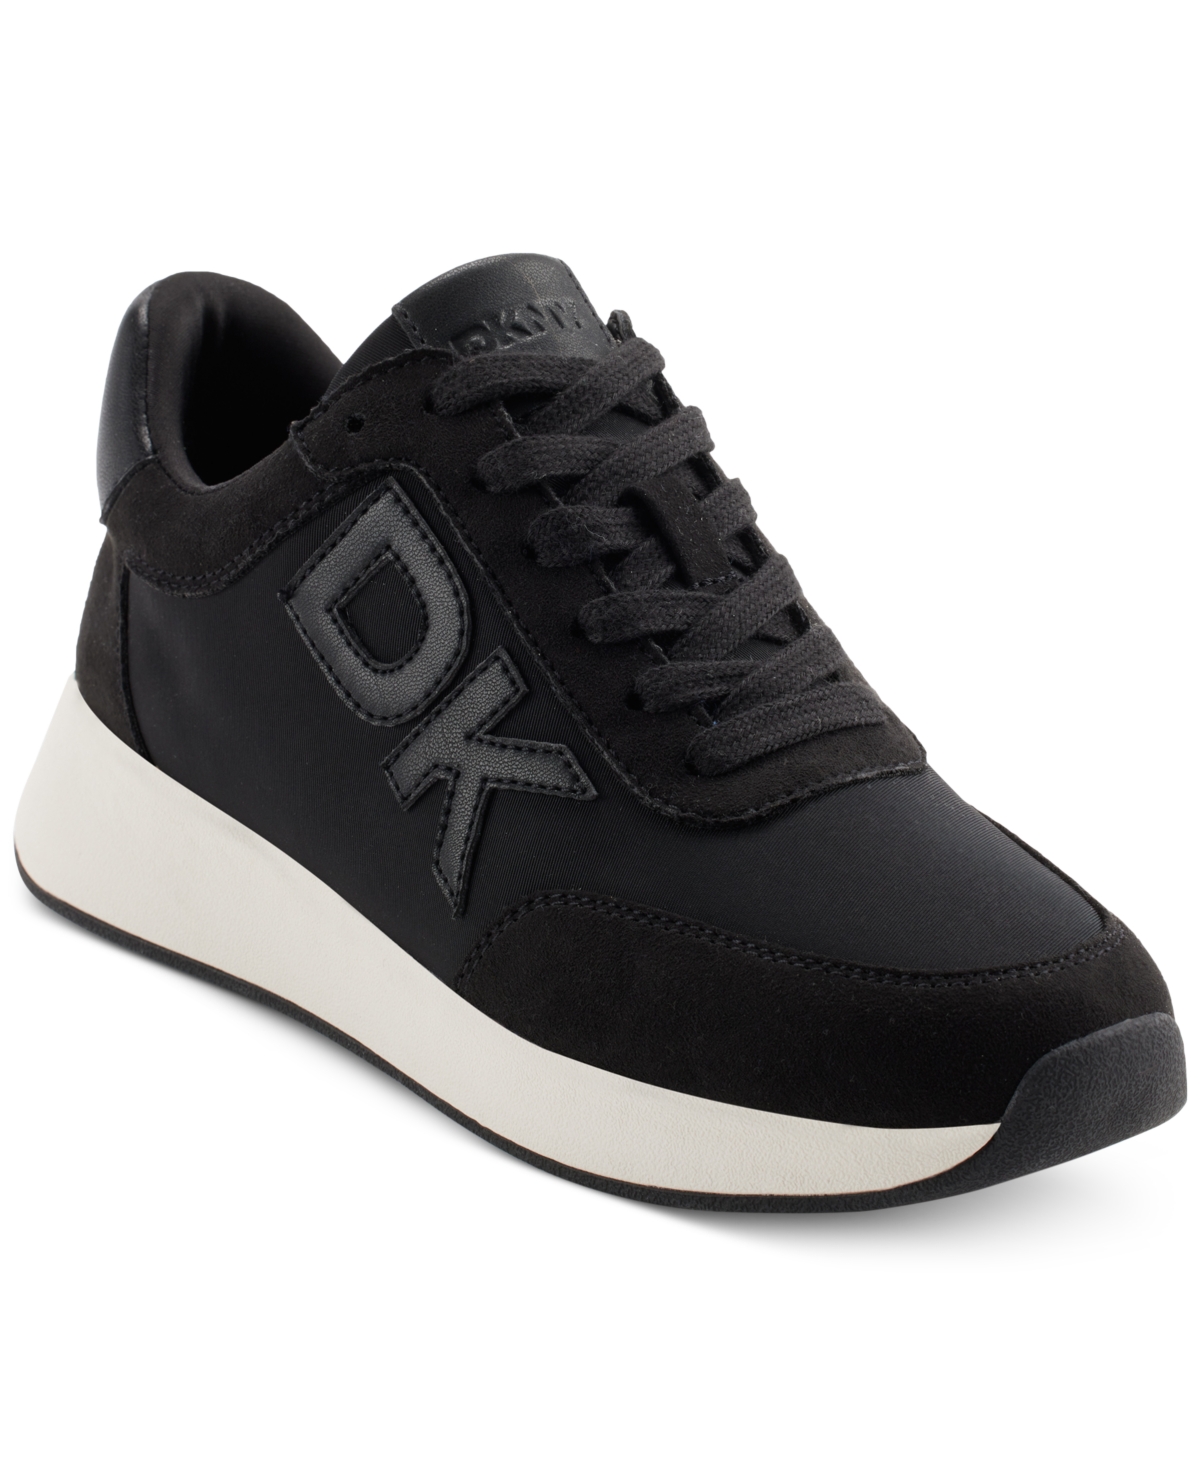 Oaks Logo Applique Athletic Lace Up Sneakers, Created for Macy's - Black